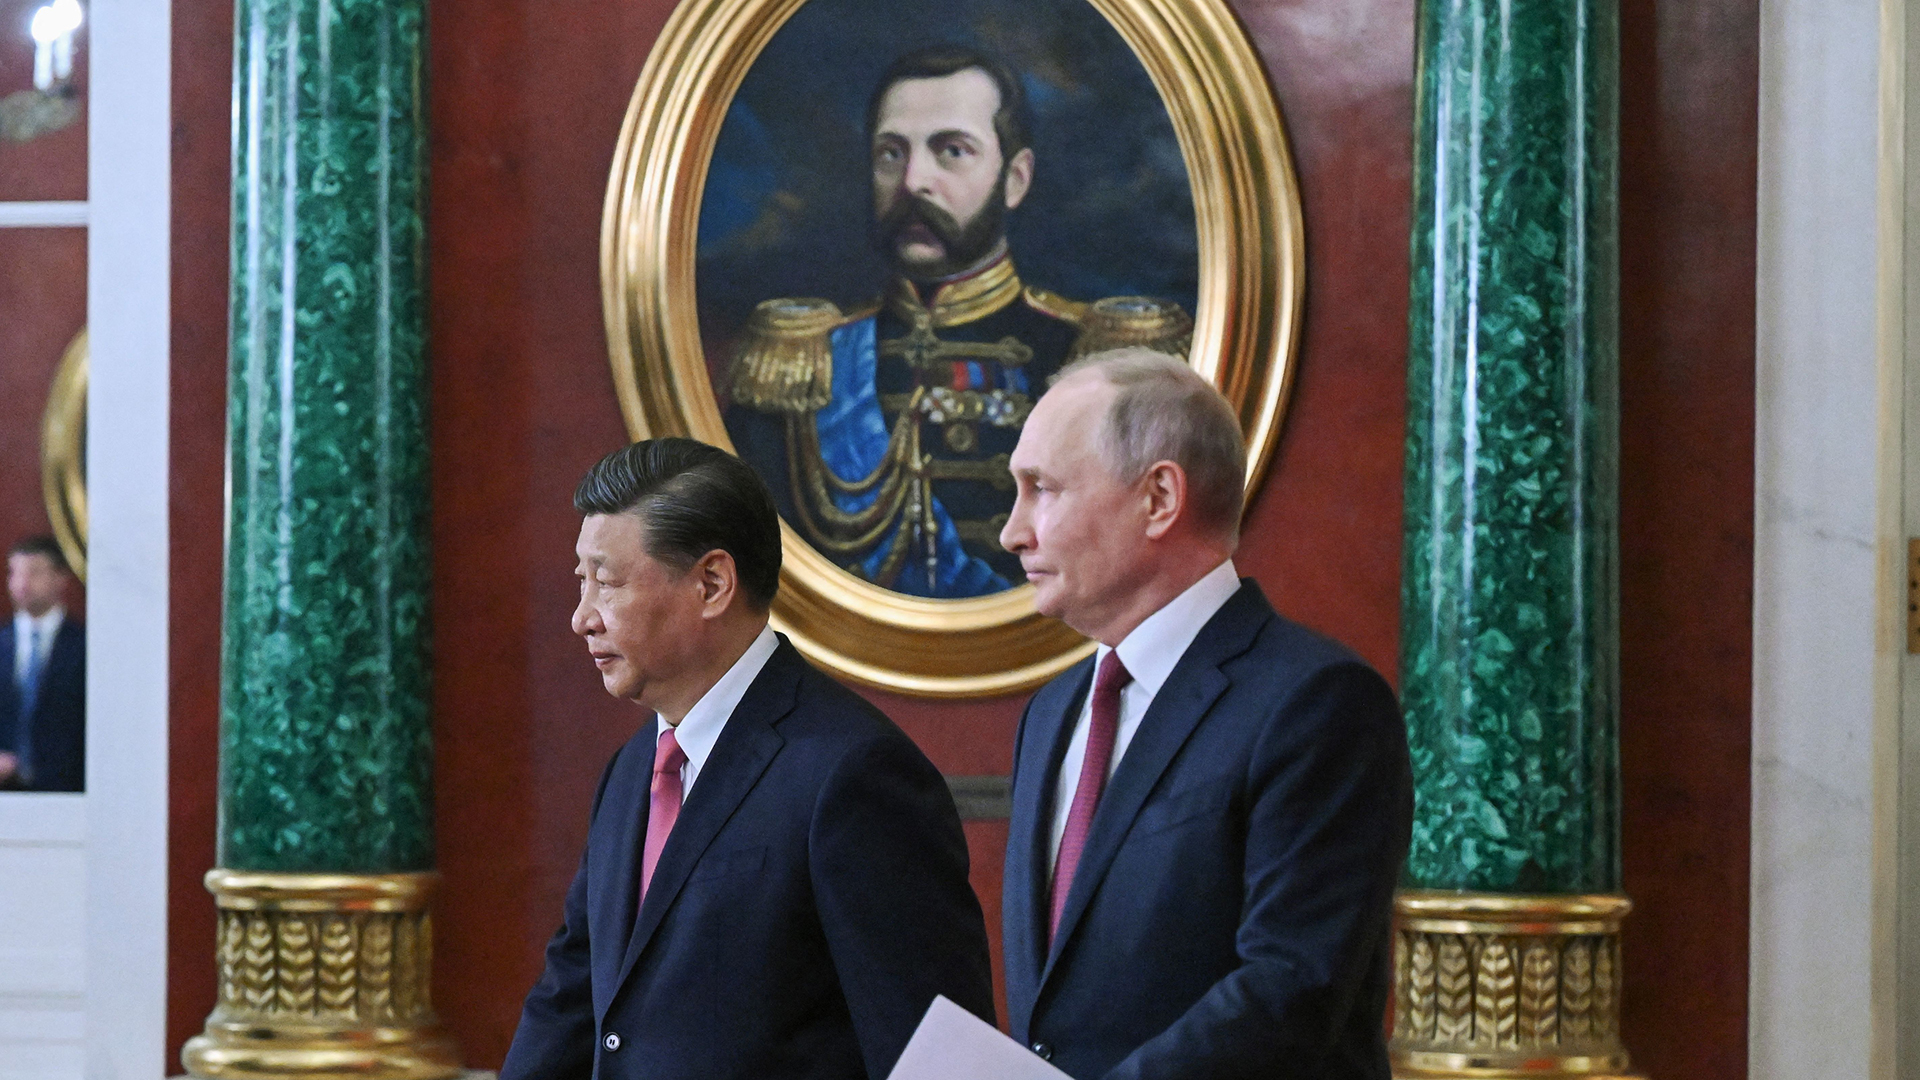 Russian President Vladimir Putin and China's President Xi Jinping arrive for a signing ceremony following their talks at the Kremlin in Moscow on March 21.